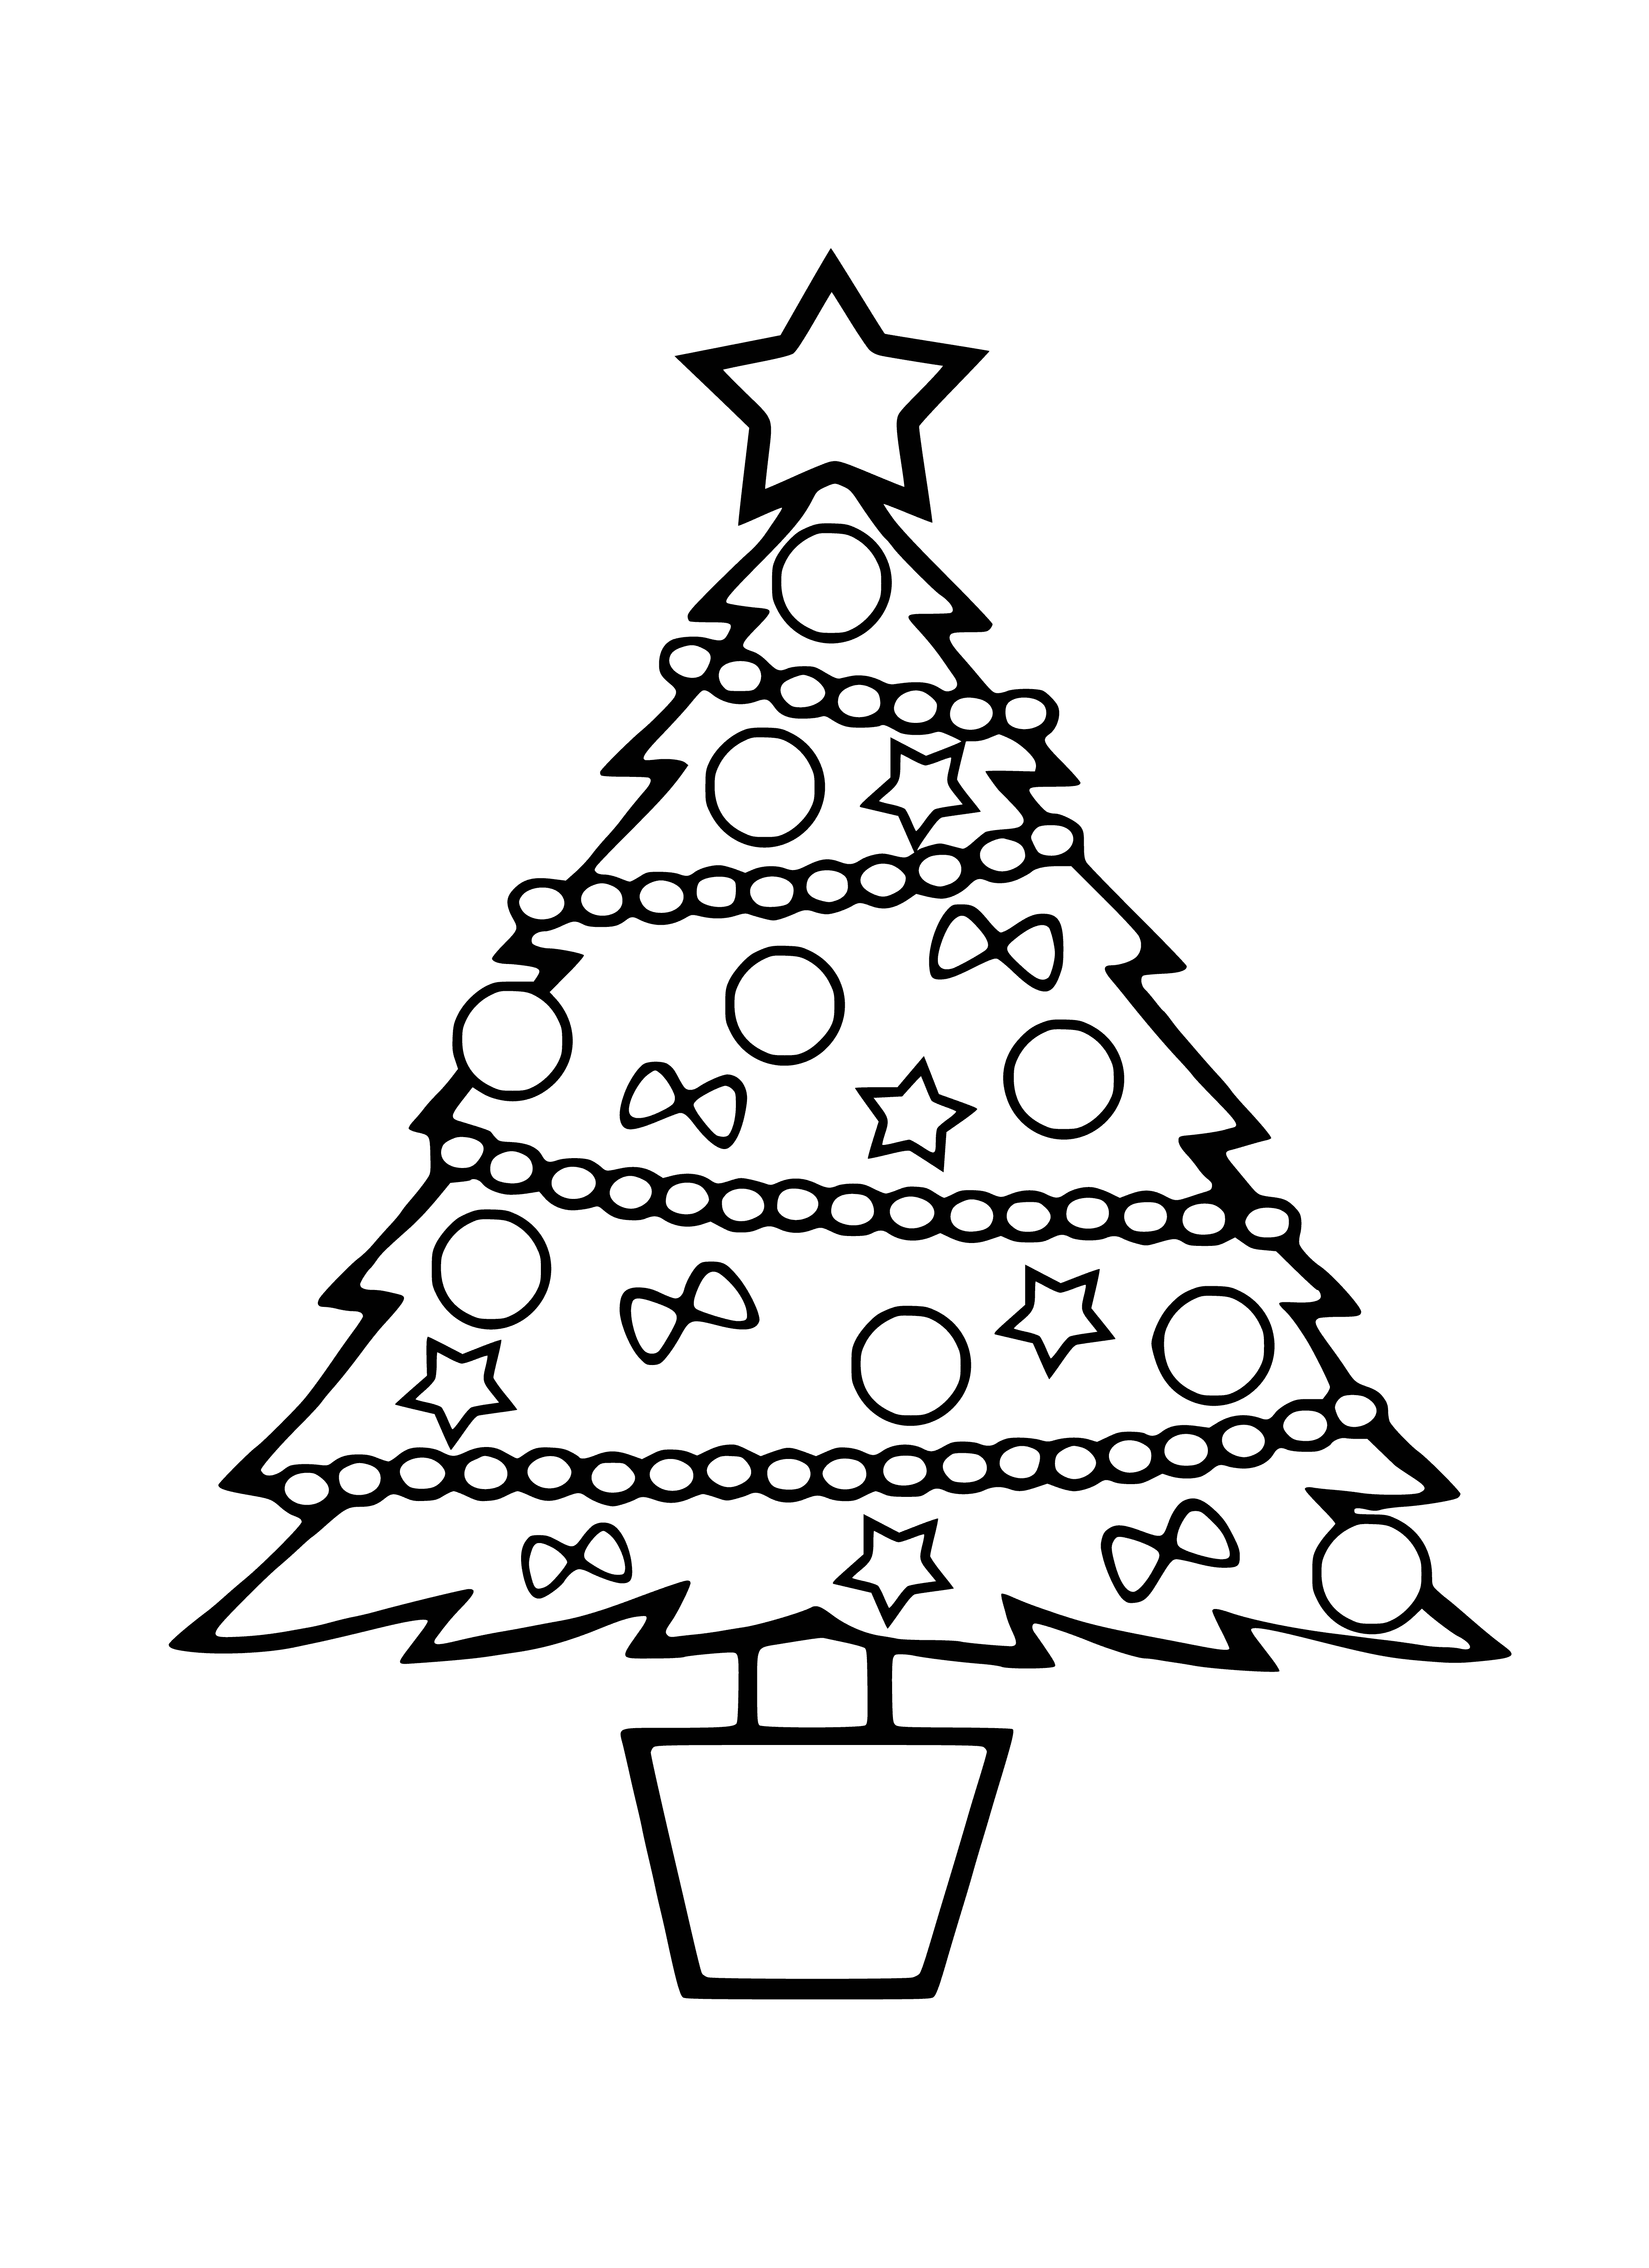 coloring page: Two Christmas trees, gifts, & kids smiling: a festive coloring page full of lights & ornaments perfect for a holiday activity!